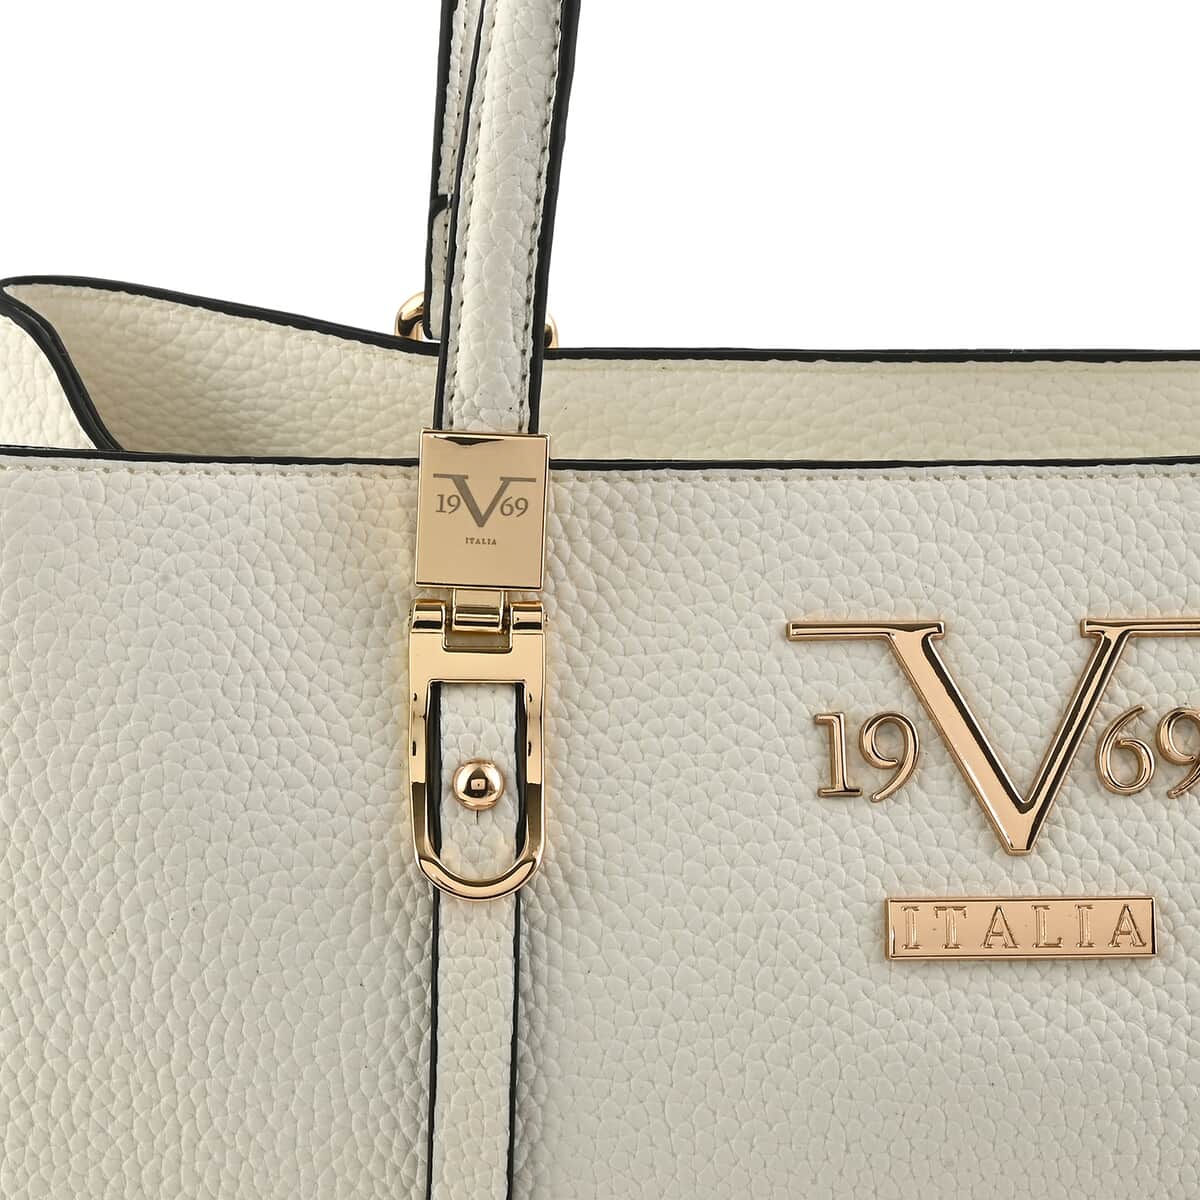 19V69 ITALIA by Alessandro Versace Pebble Texture Faux Leather Tote Bag with Magnetic Closure - White image number 3